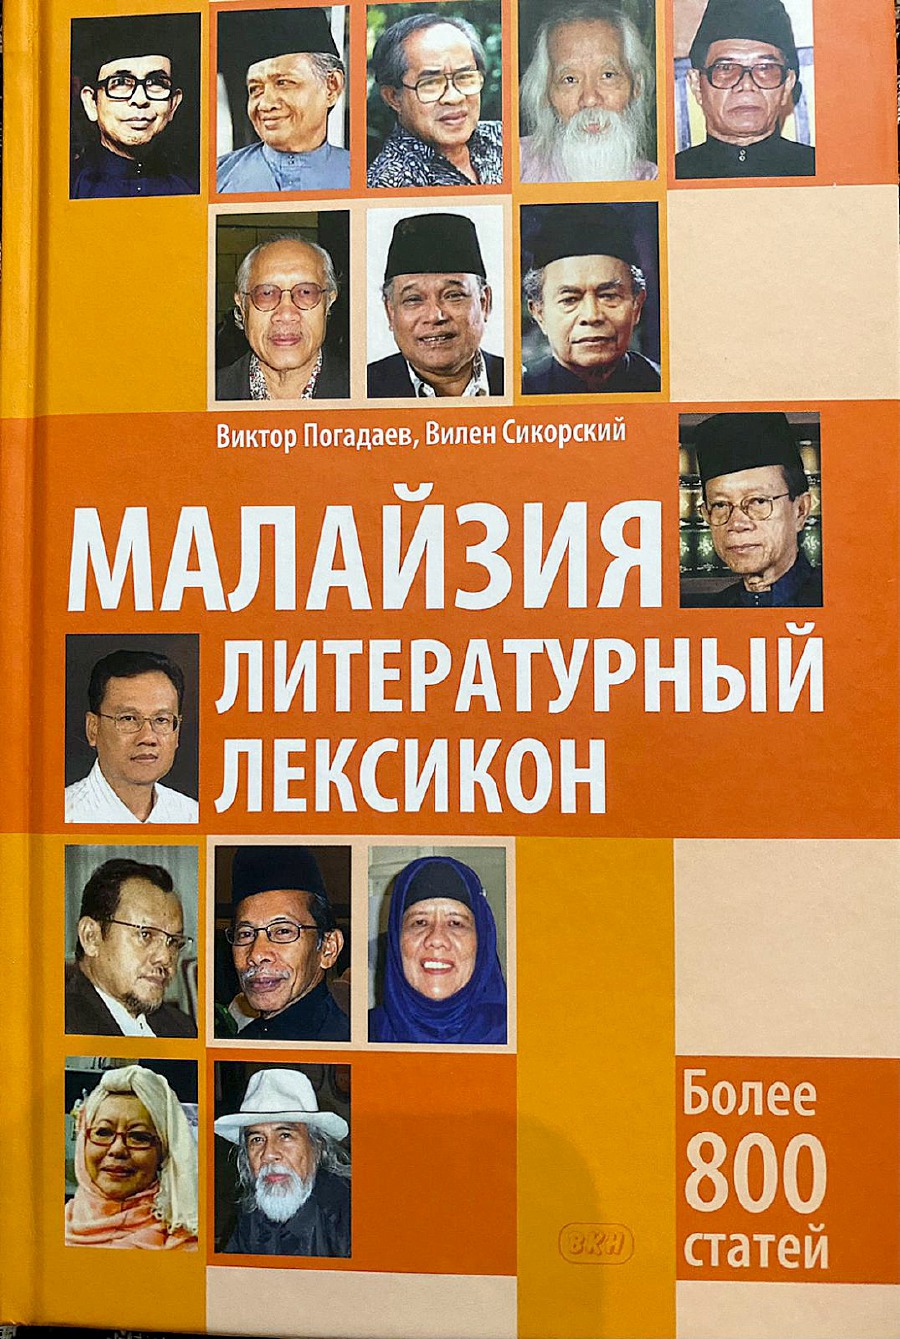 The cover of the book showing all the national laureates. -Pic courtesy of the writer